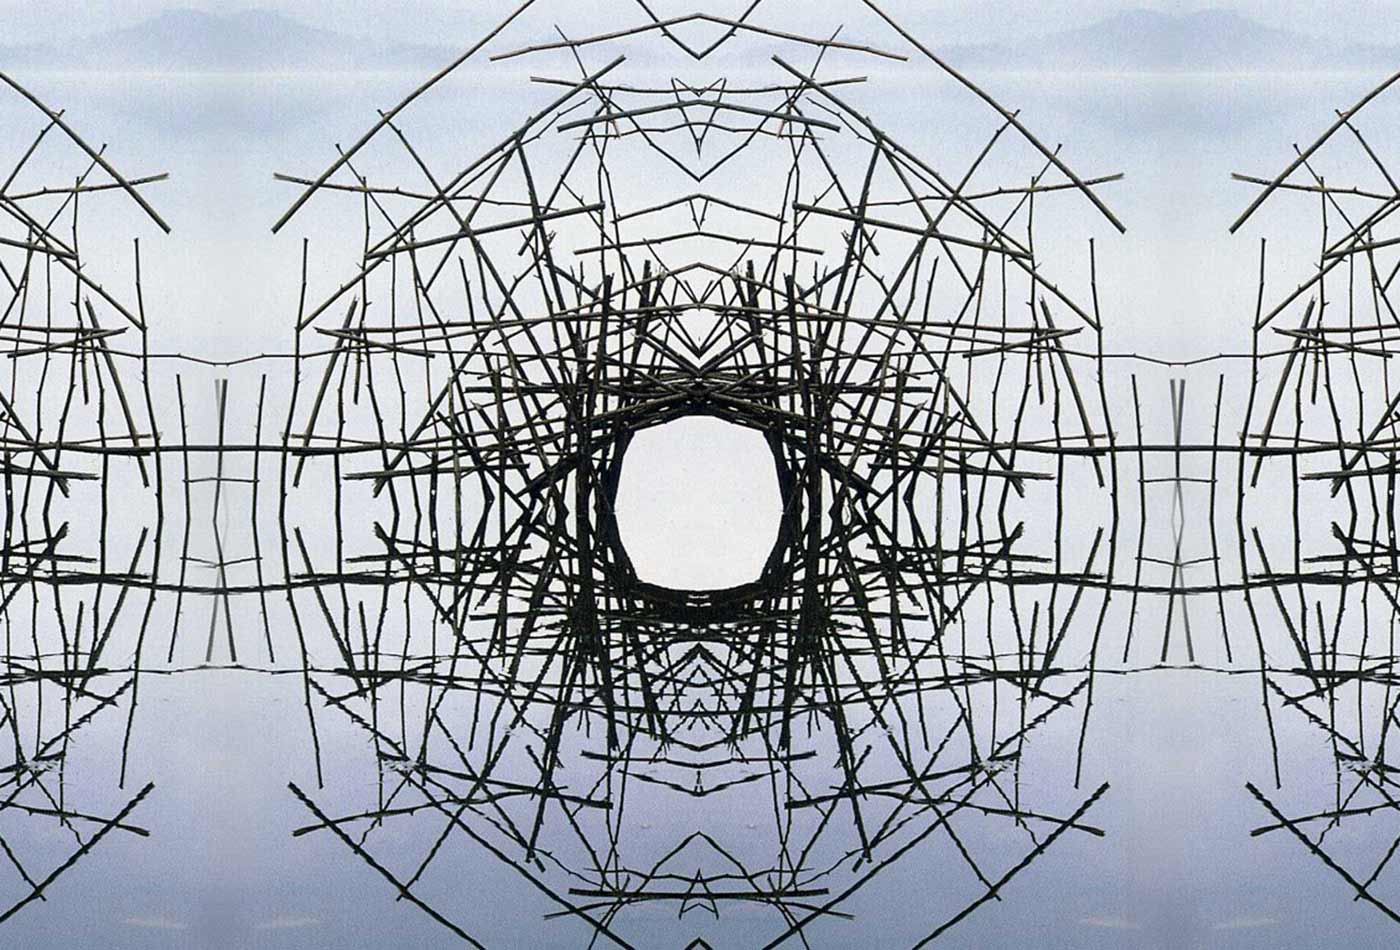 Andy Goldsworthy, Montage by iuri, Sticks Framing a Lake